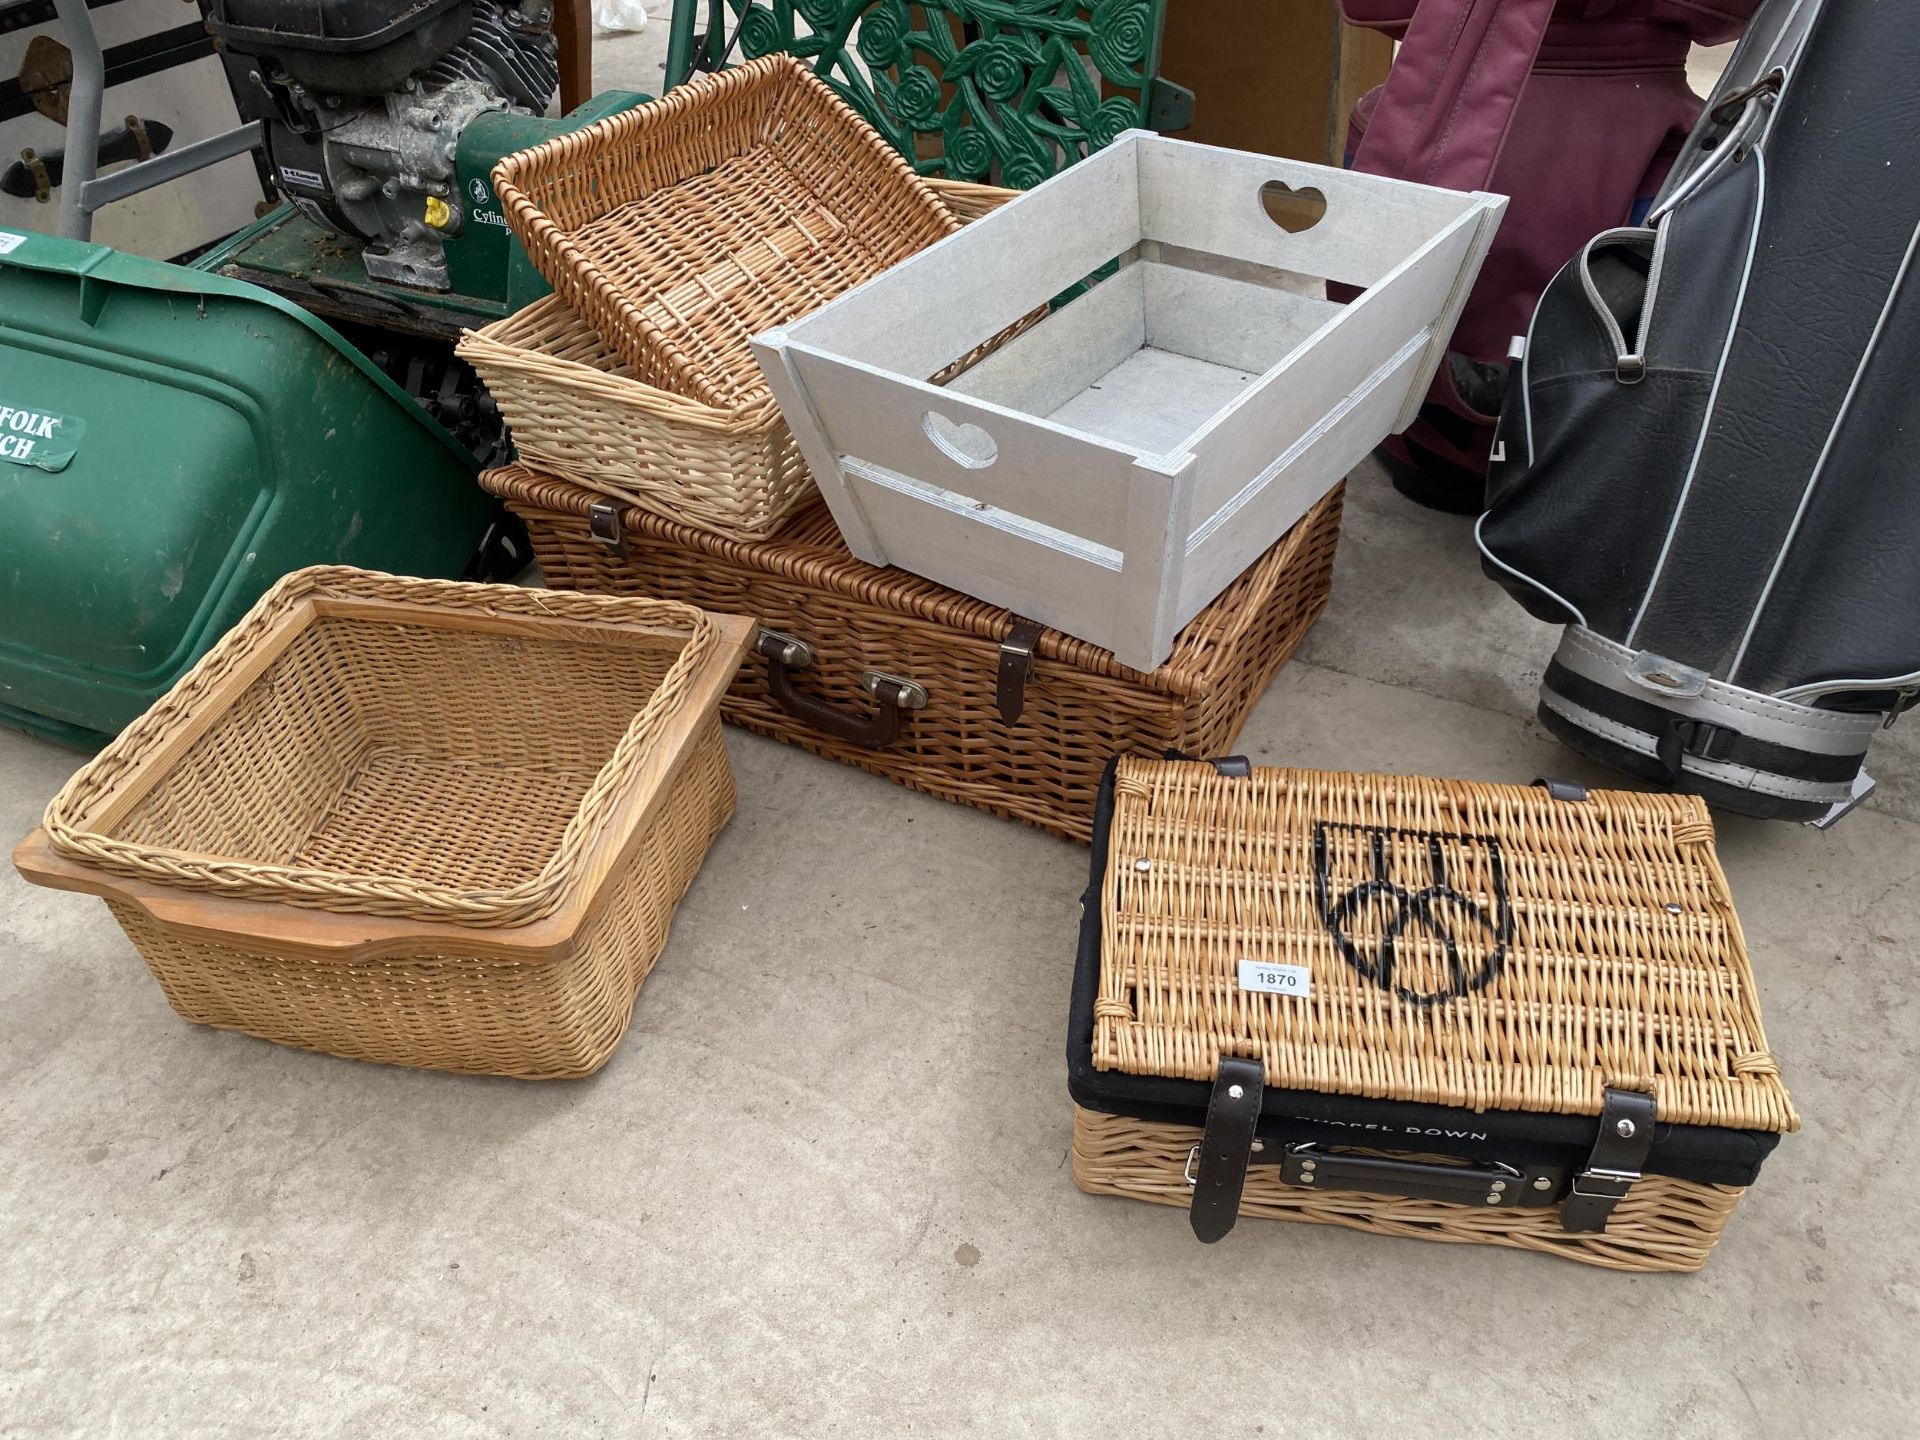 AN ASSORTMENT OF WICKER BASKETS AND A DECORATIVE WOODEN STORAGE TRAY